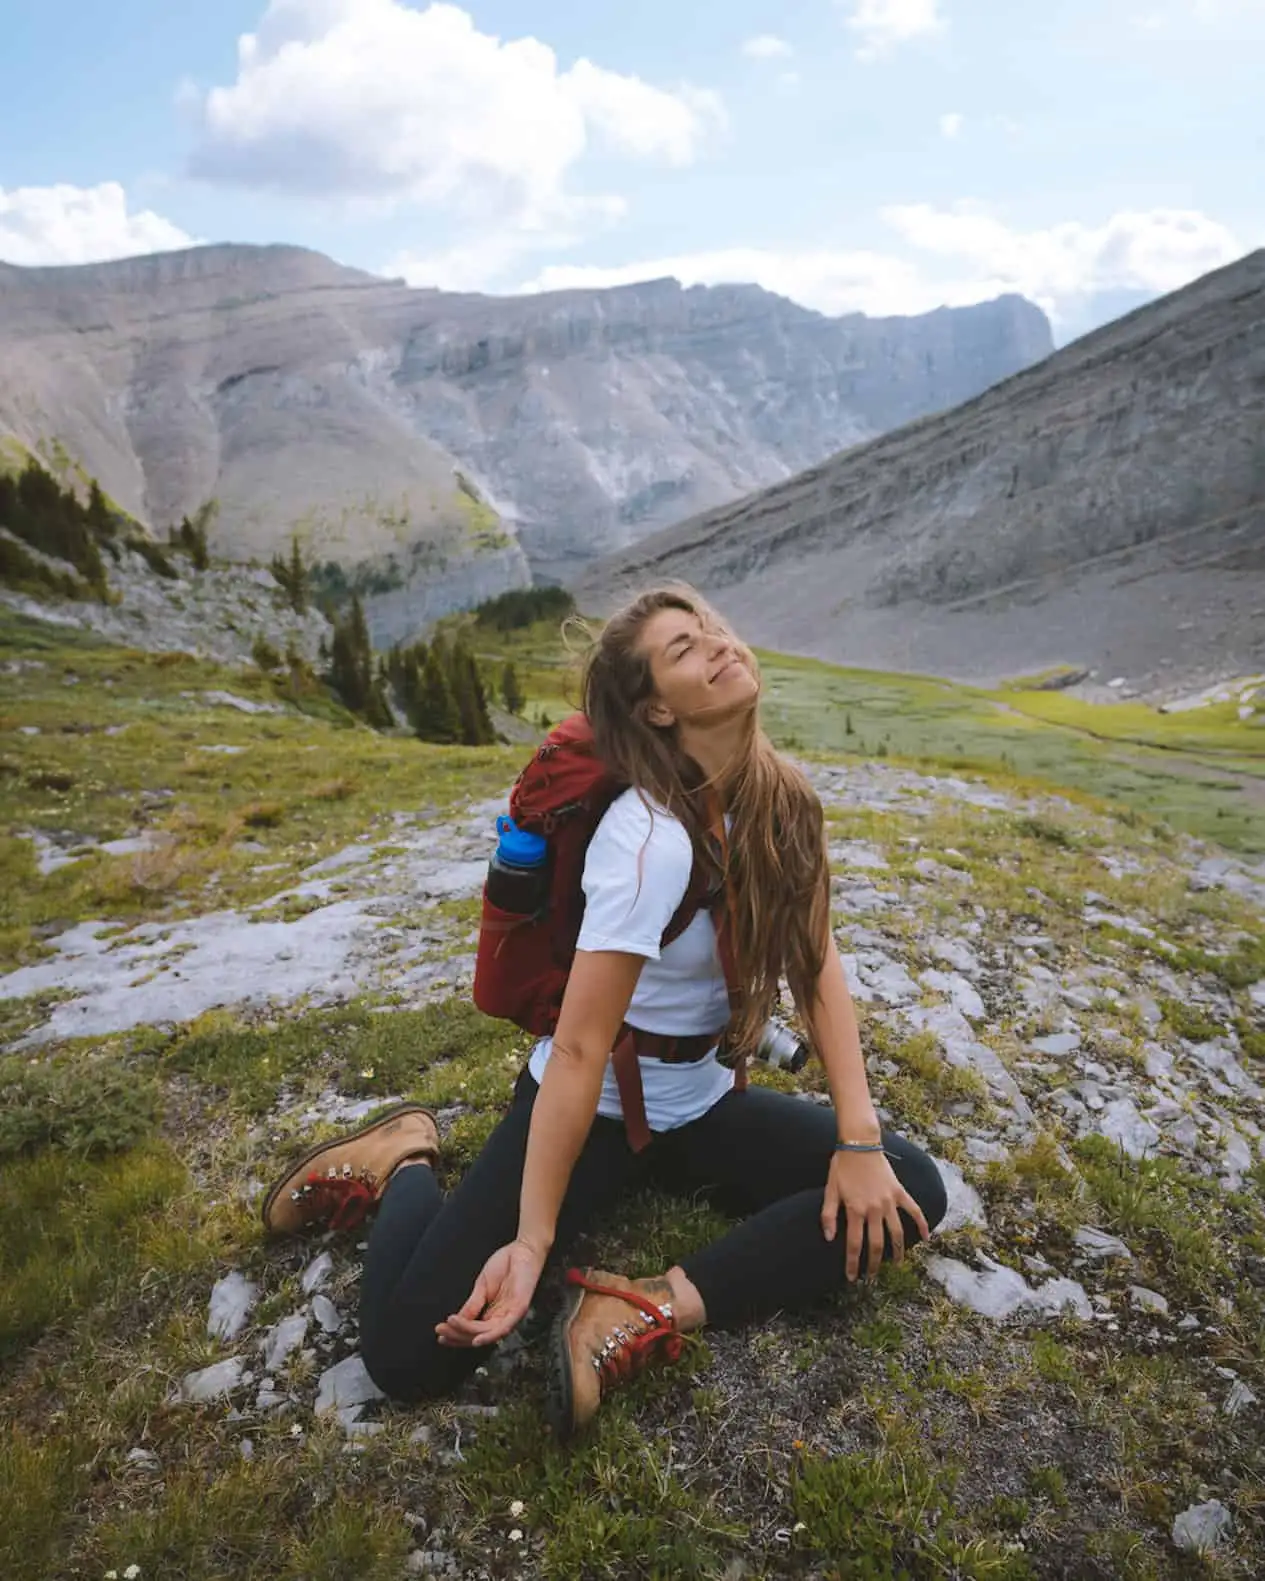 What to Wear On Hiking Date: Tips for Outdoor Adventurers